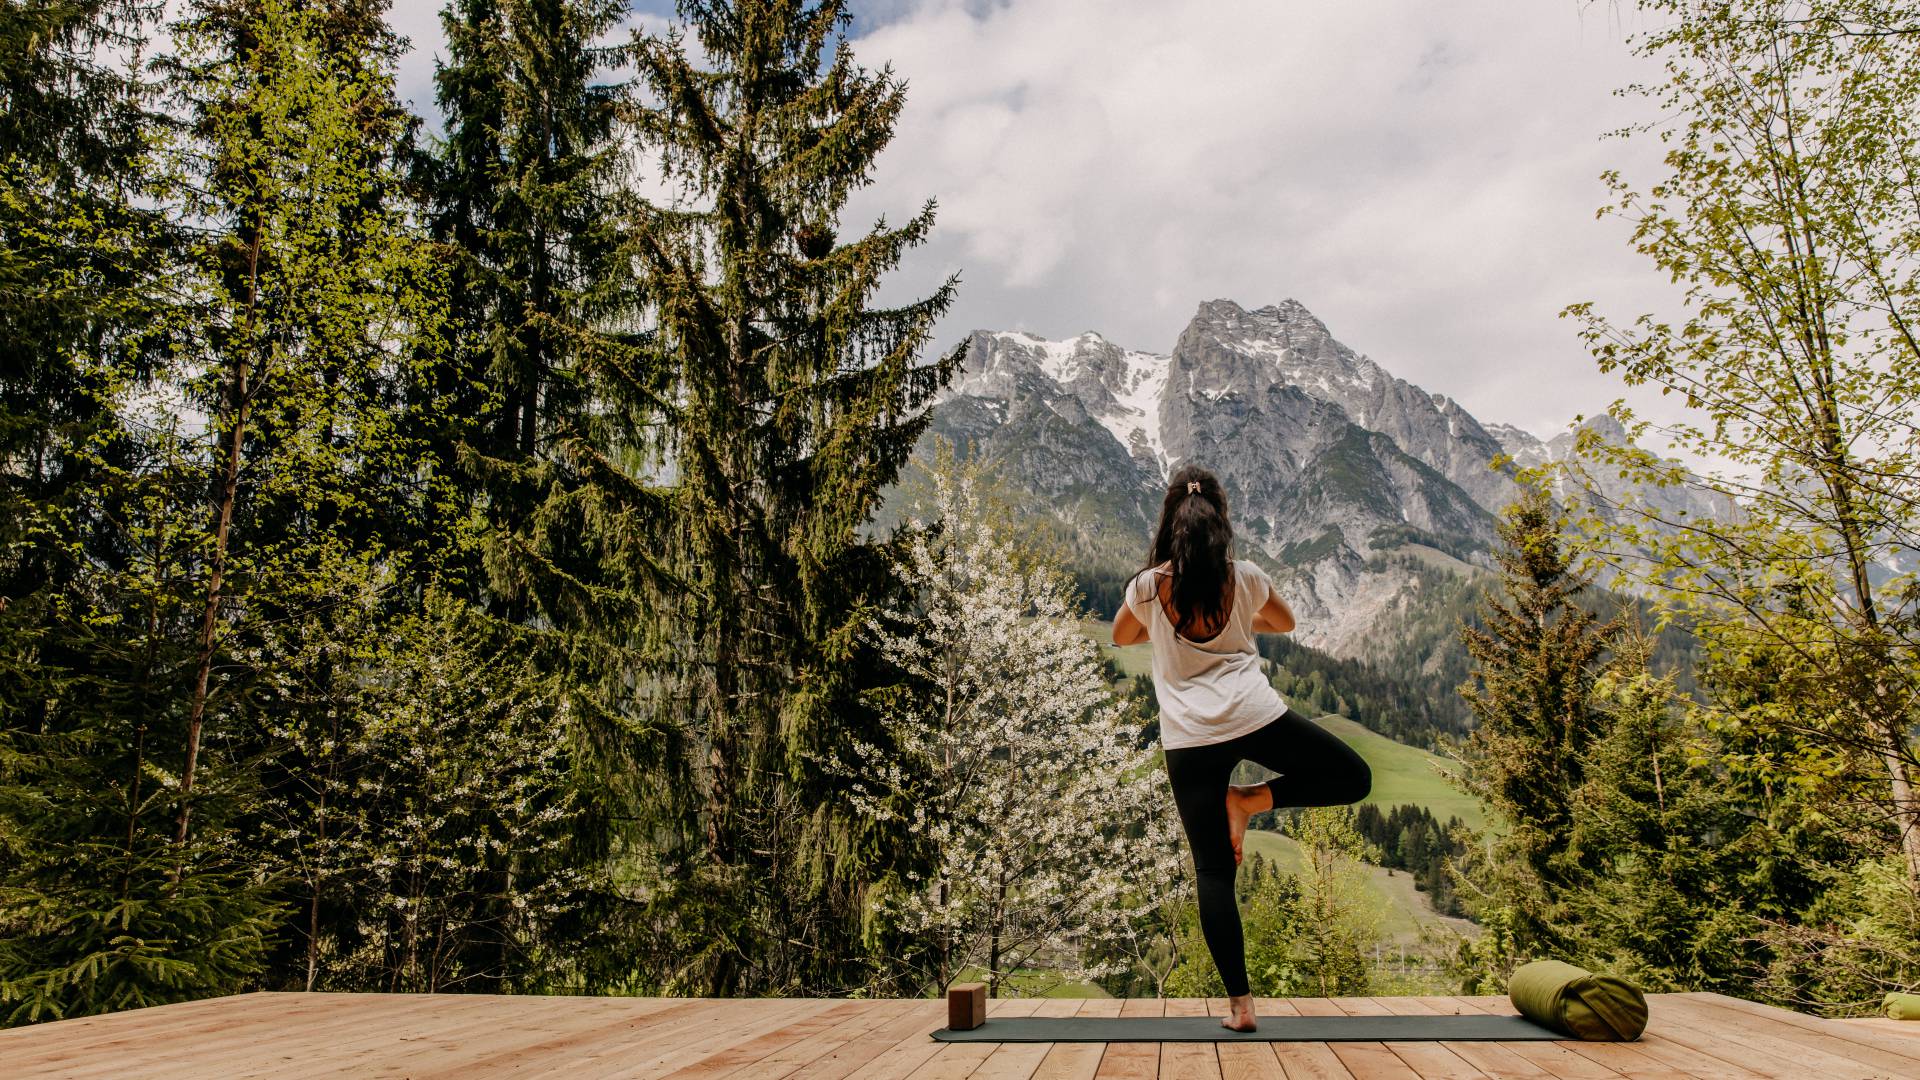 Summer holiday relaxation - woman on yoga platform